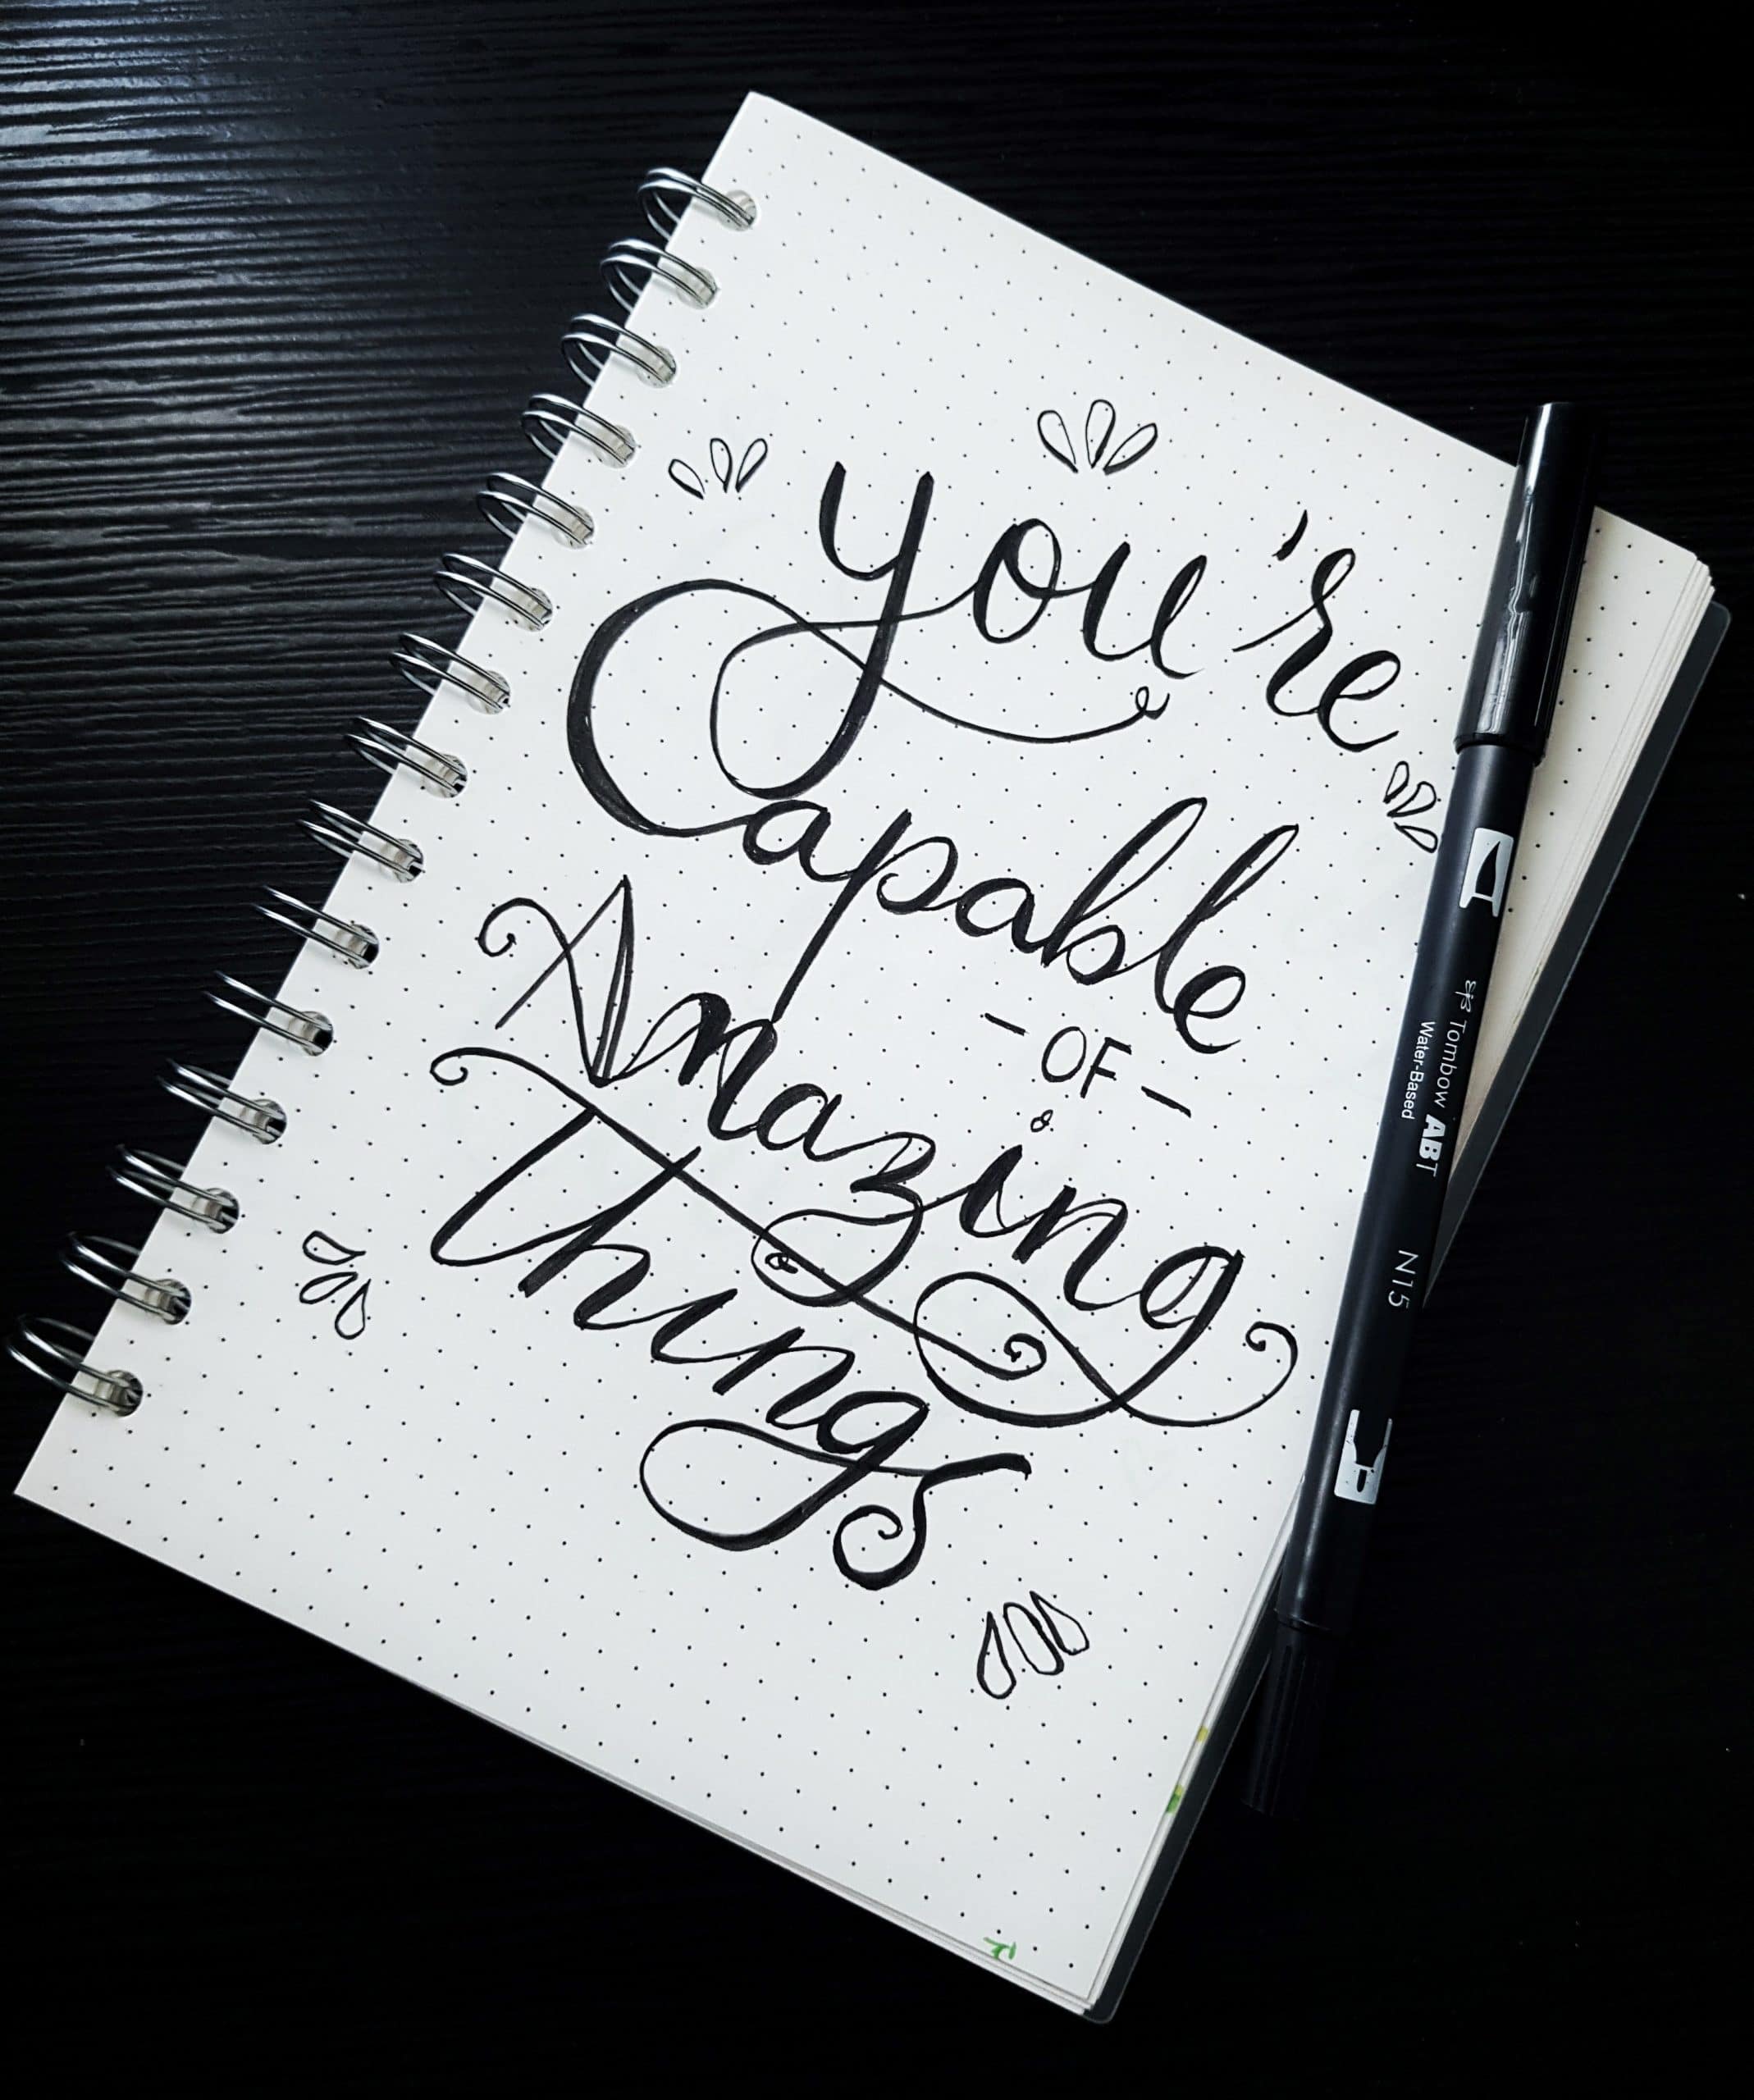 Calligraphy inspirational quote 